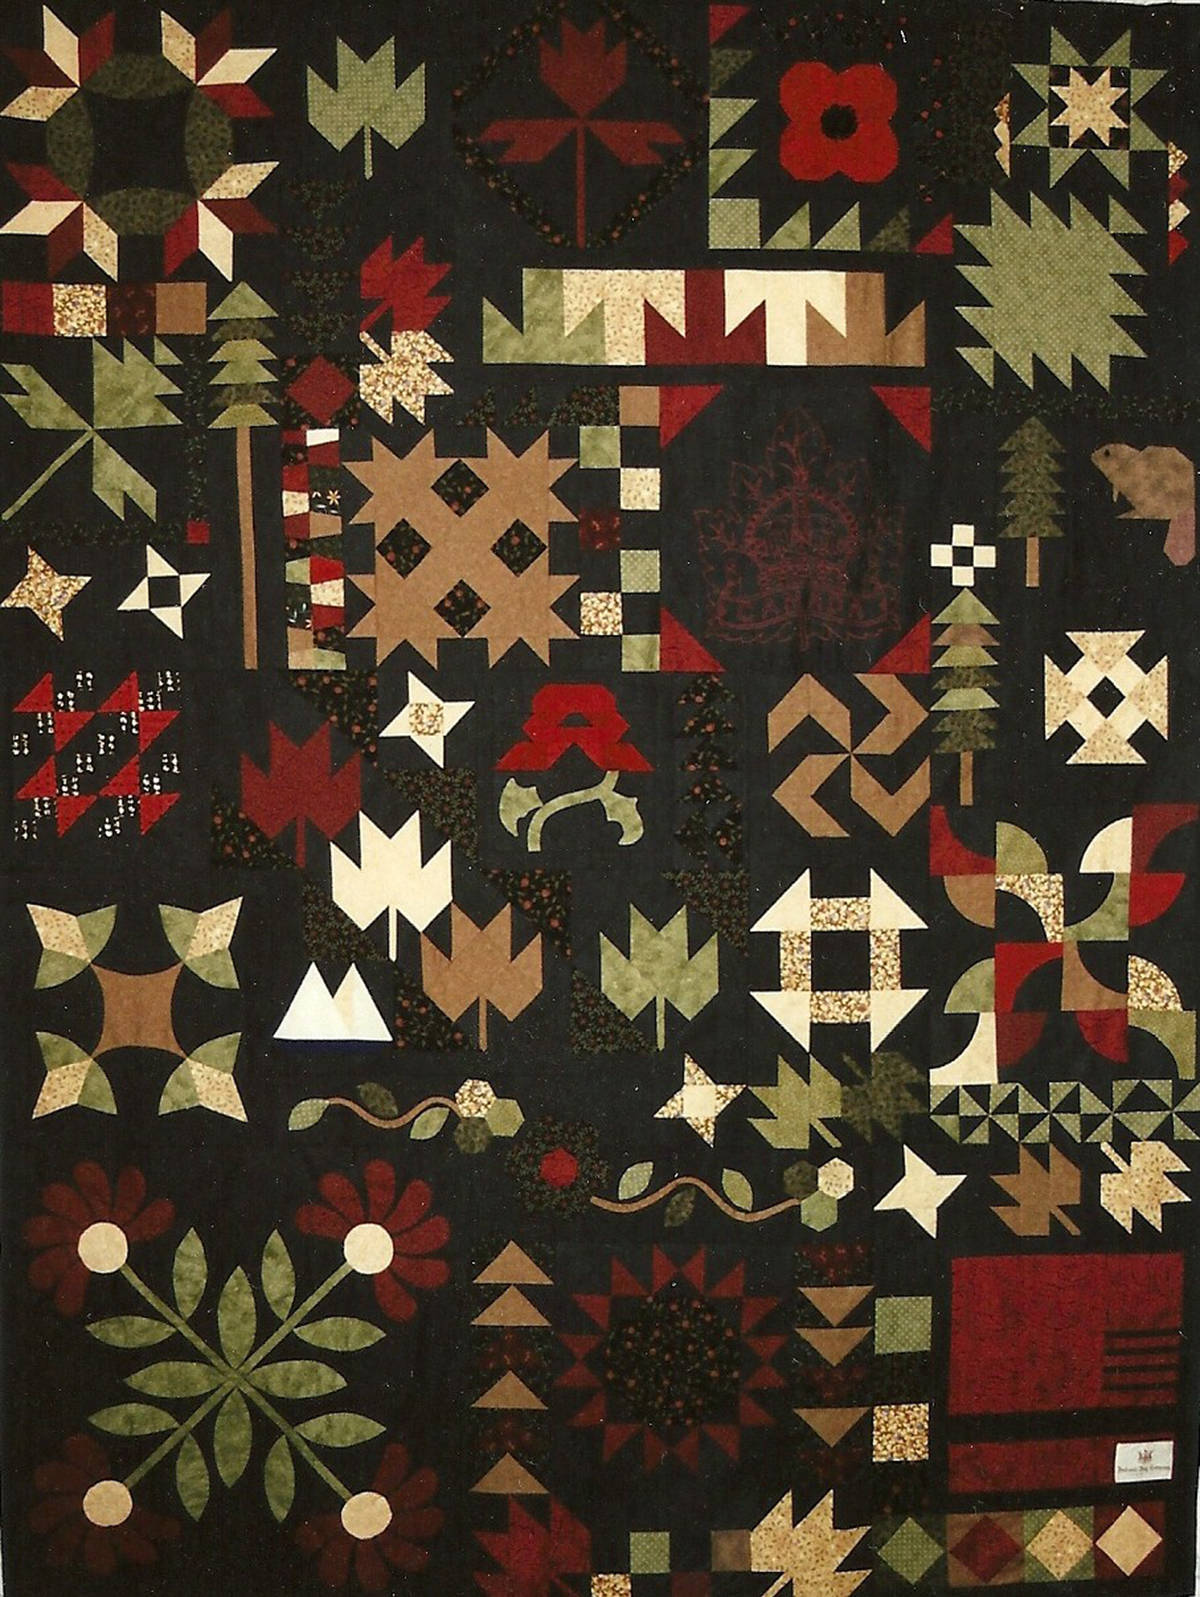 9619274_web1_Diane-Stevenson-Canadiana-in-Cloth--2007--machine-and-handmade-quilt.